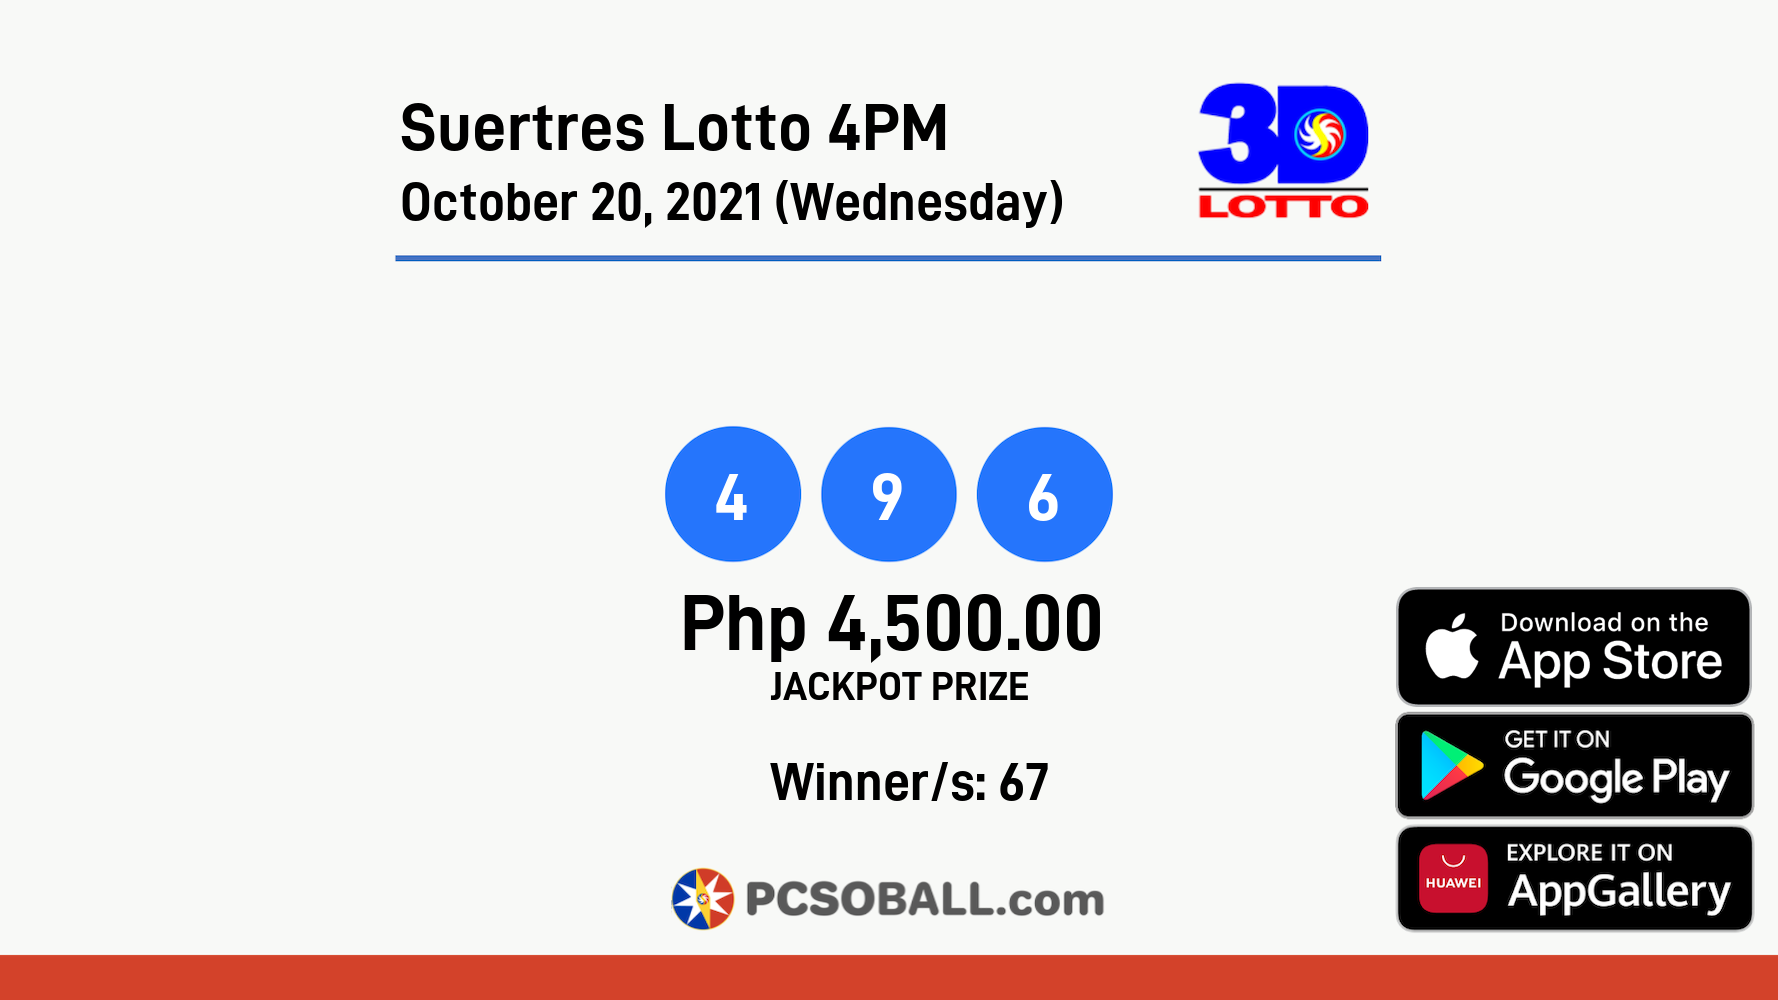 Suertres Lotto 4PM October 20, 2021 (Wednesday) Result